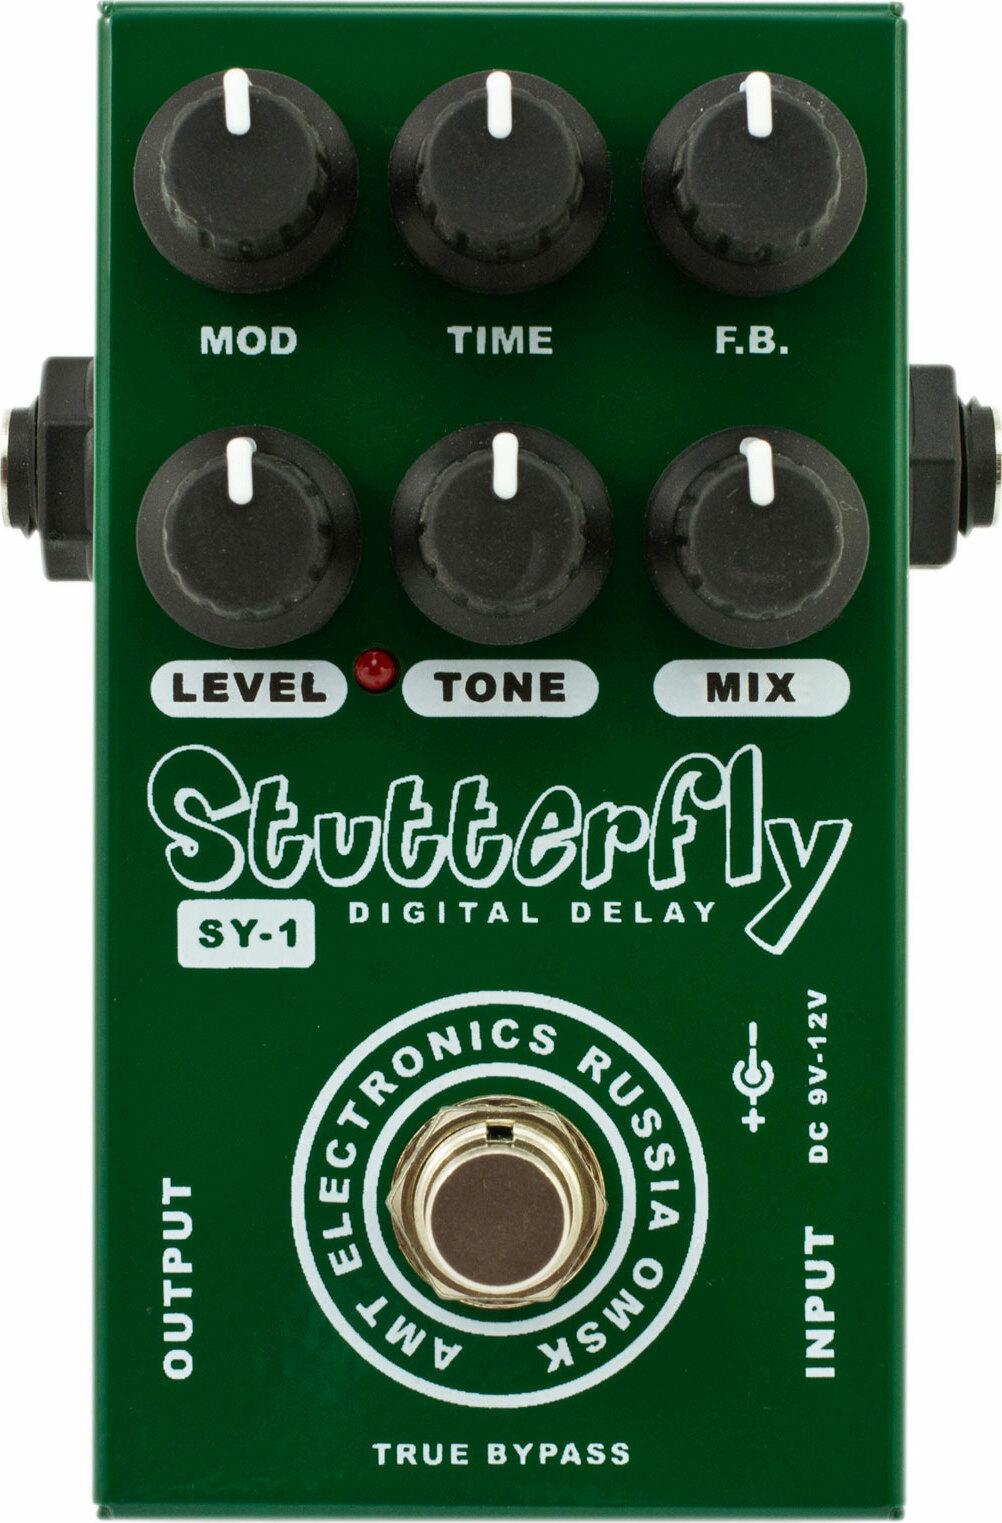 Amt Electronics Sy1 Stutterfly Delay Digital - Reverb, delay & echo effect pedal - Main picture